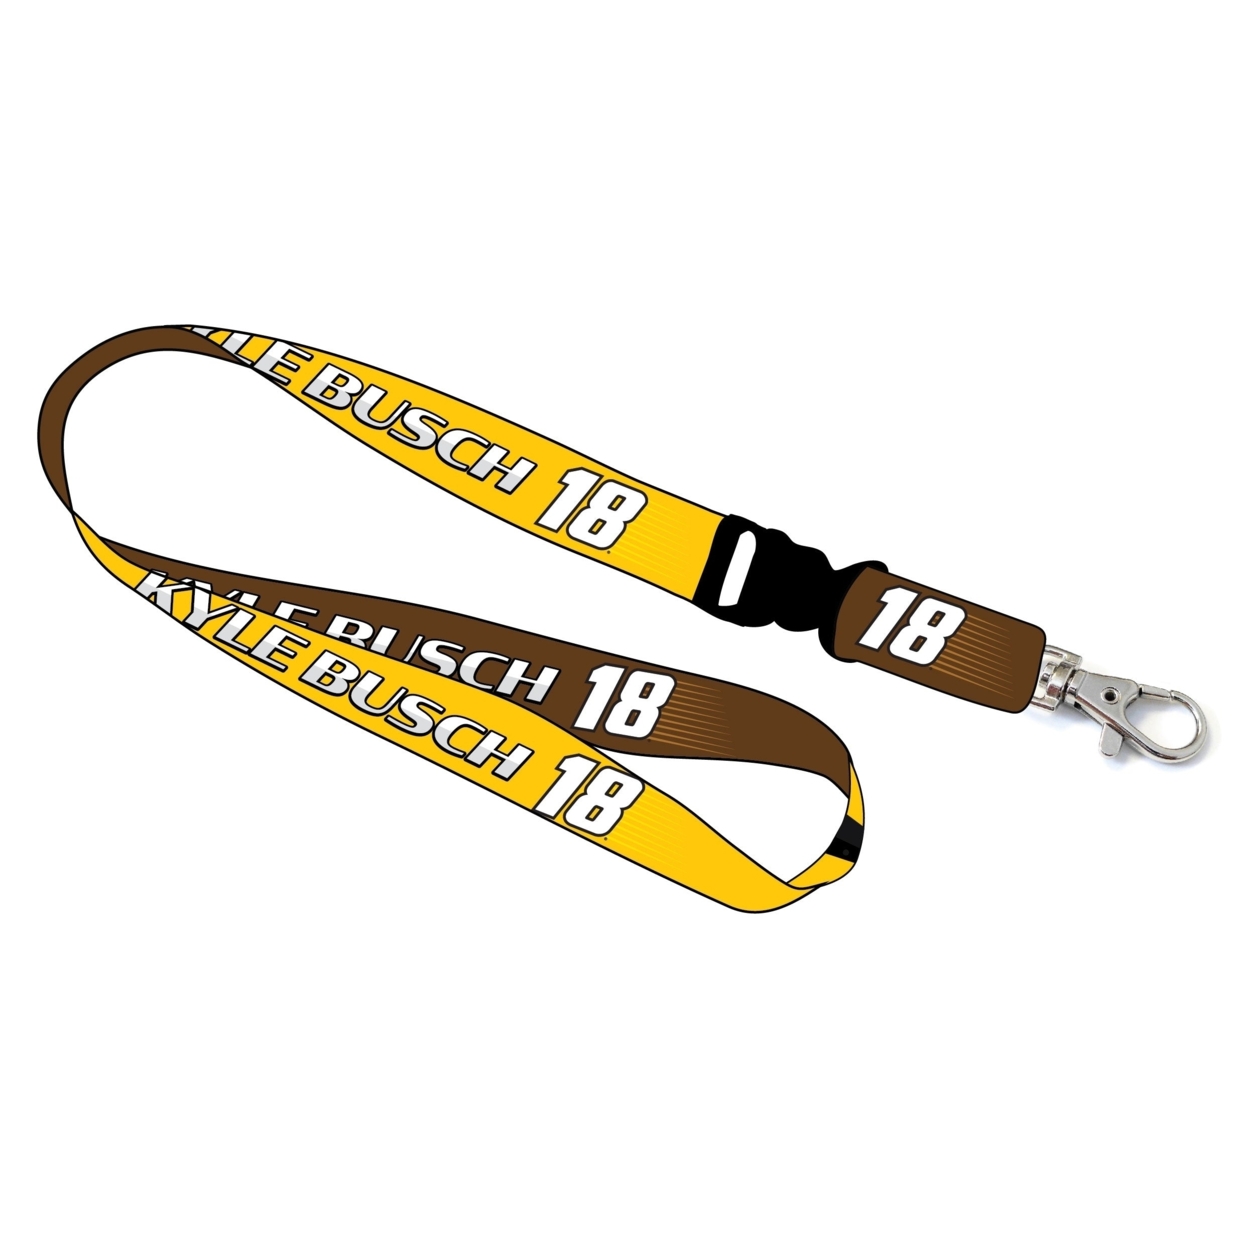 Kyle Busch #18 NASCAR Cup Series Lanyard New For 2021